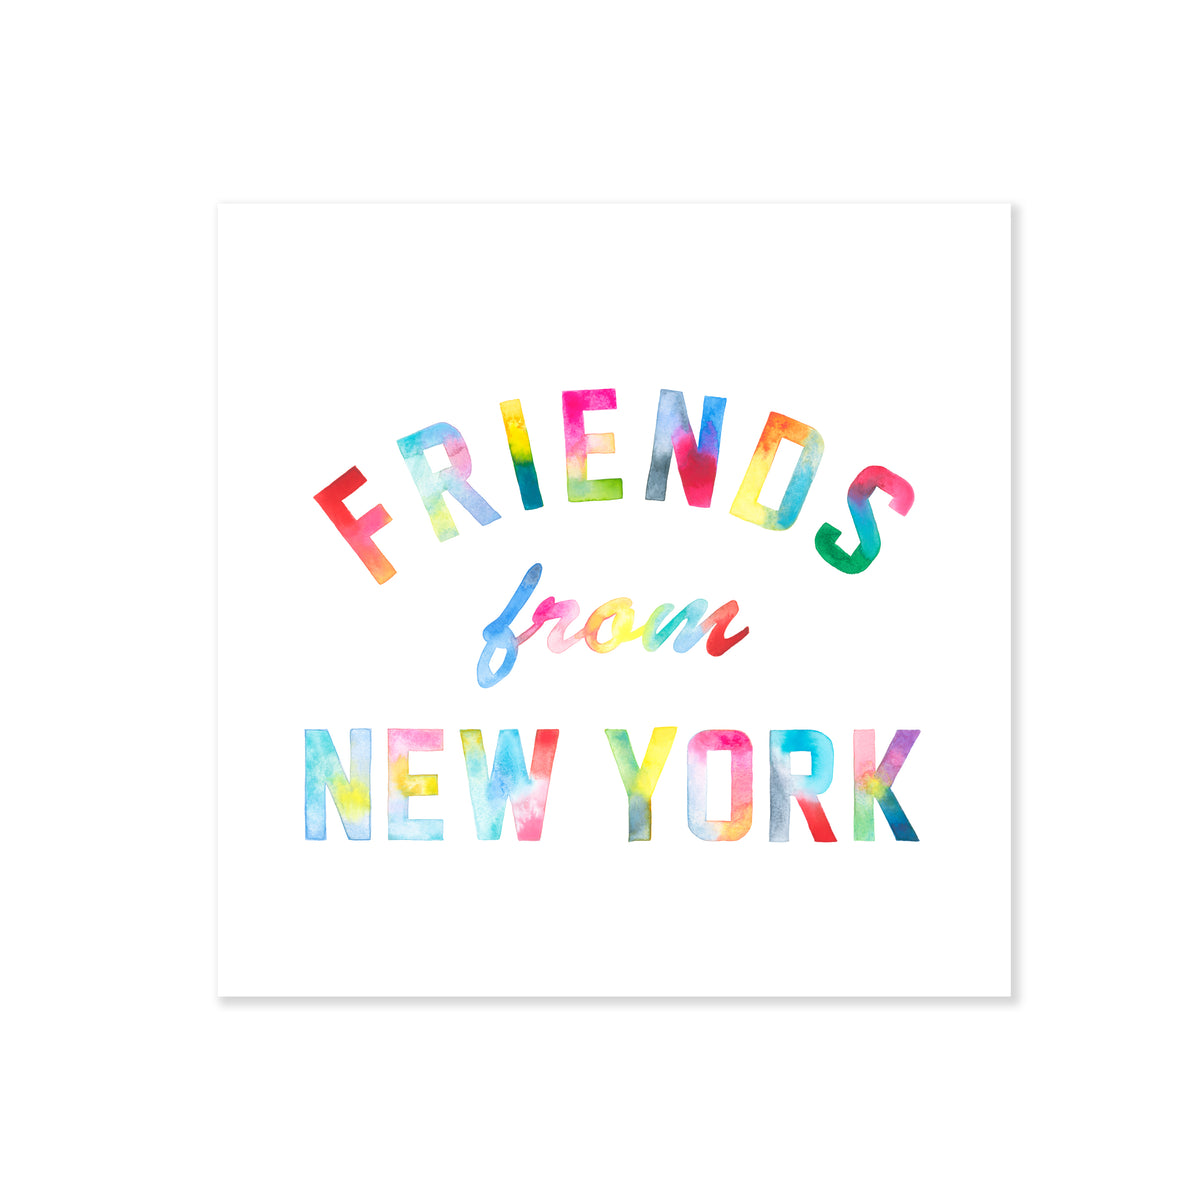 FRIENDS FROM NEW YORK